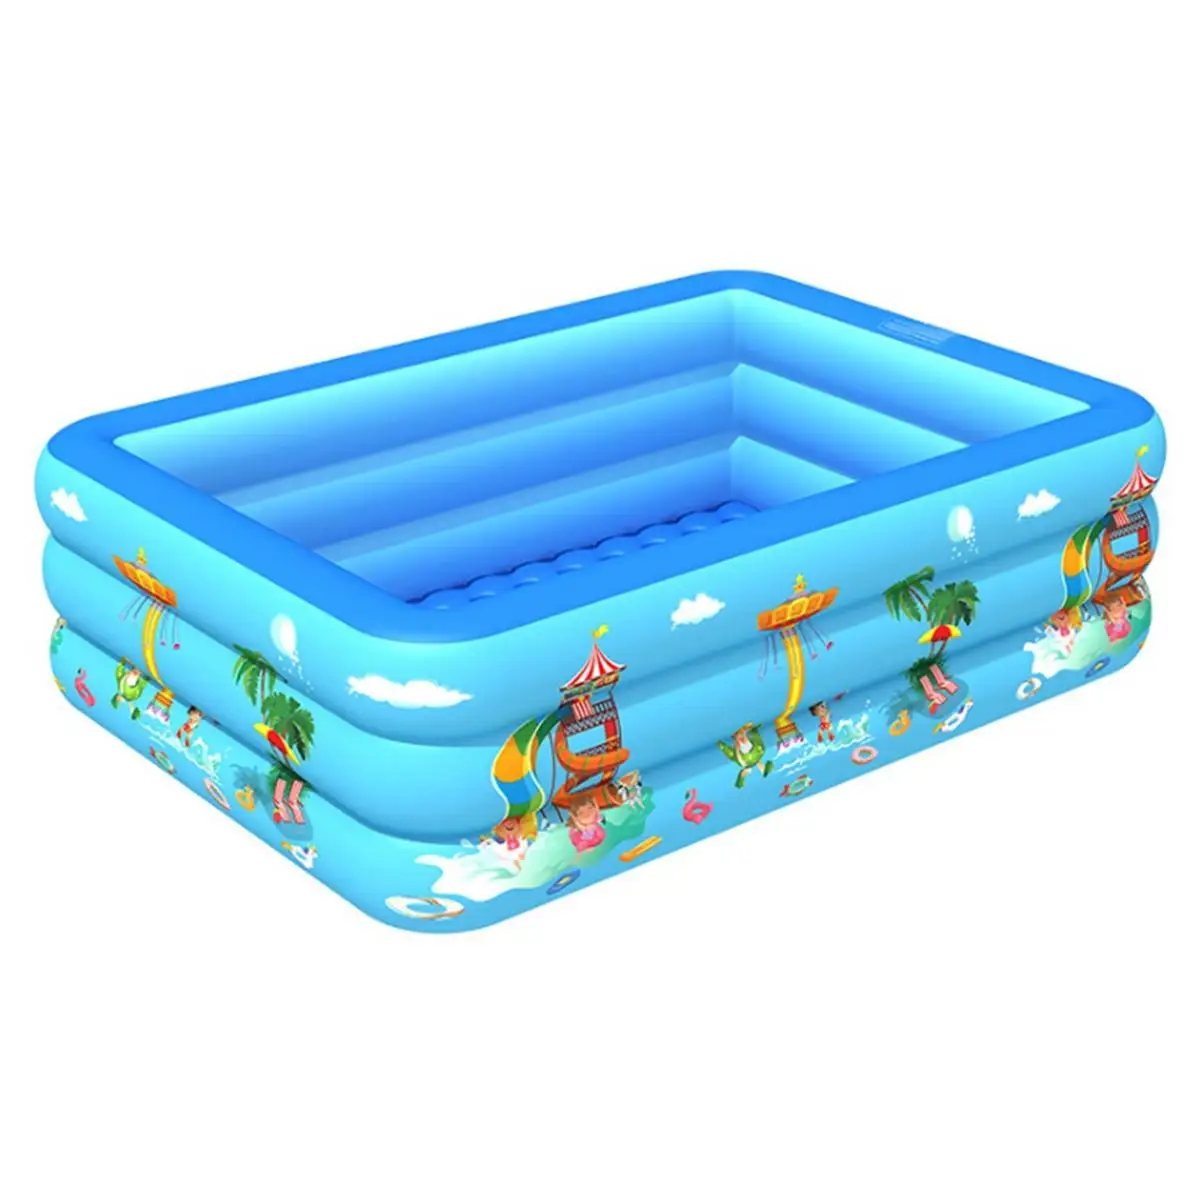 

120/130/150 CM Rectangular Inflatable Swimming Pool Paddling Pool Bathing Tub Outdoor Summer Swimming Pool For Kids Square